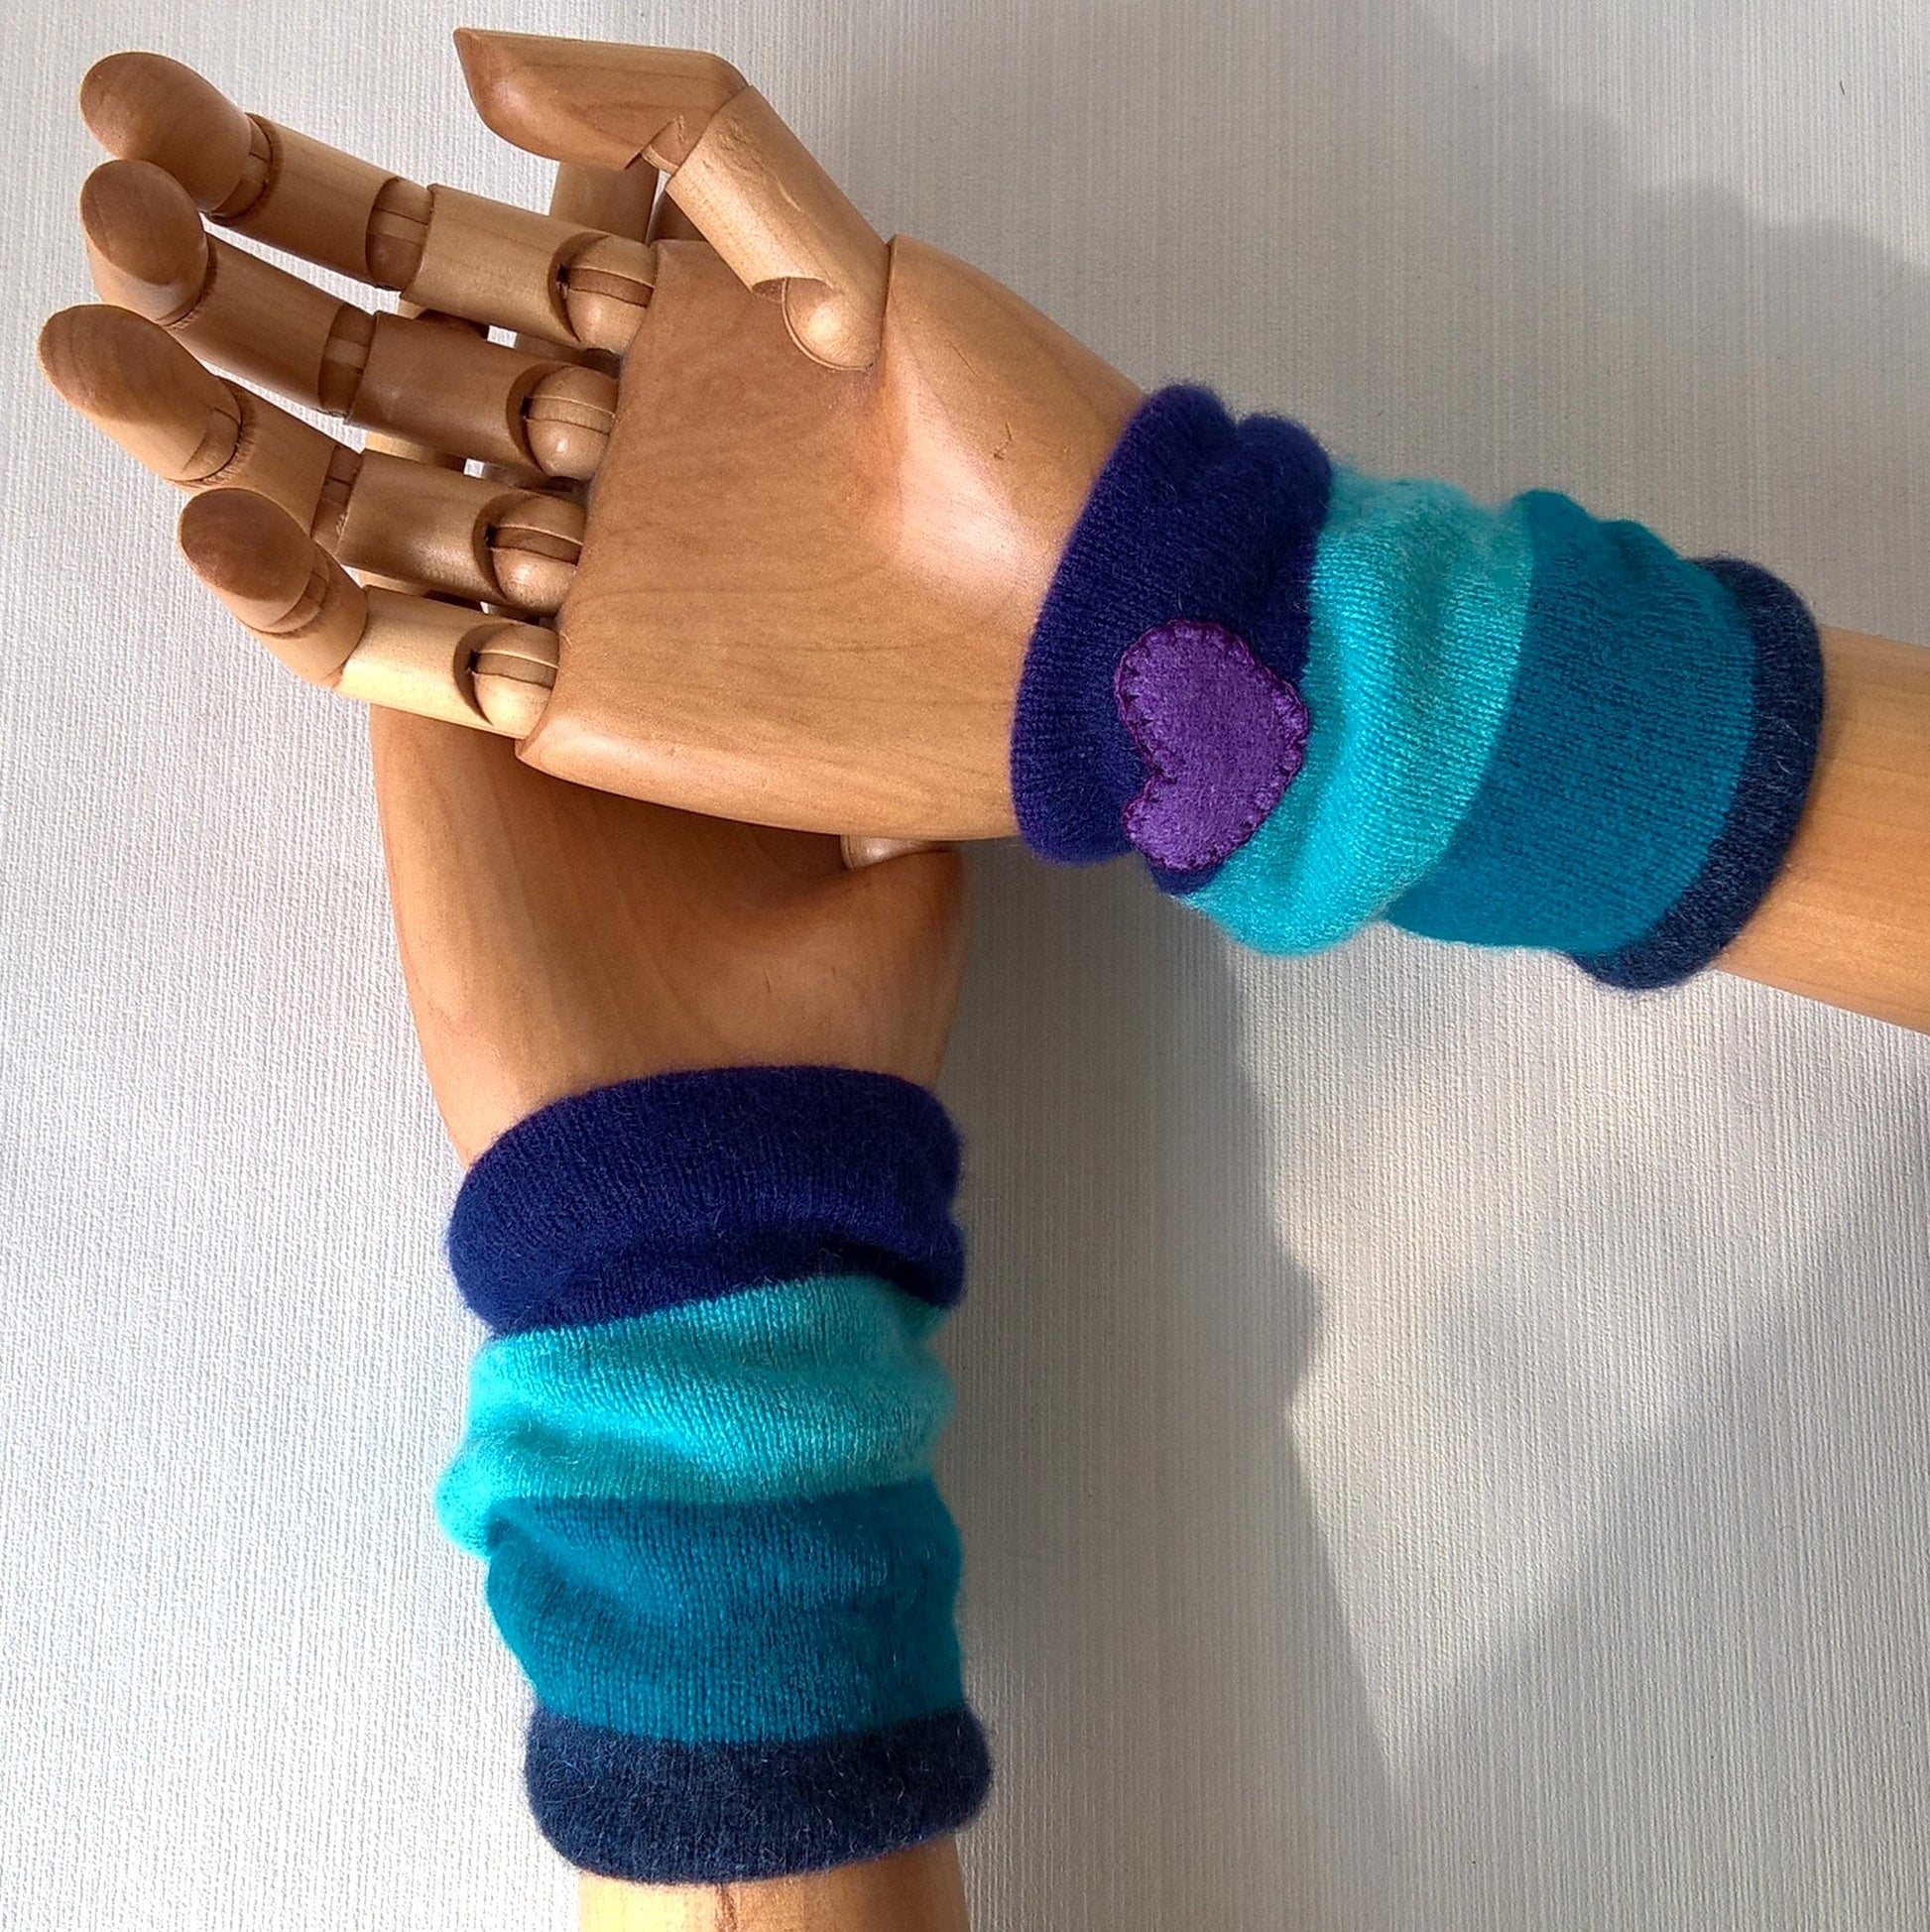 Cashmere pulse point wrist warmers with applique heart